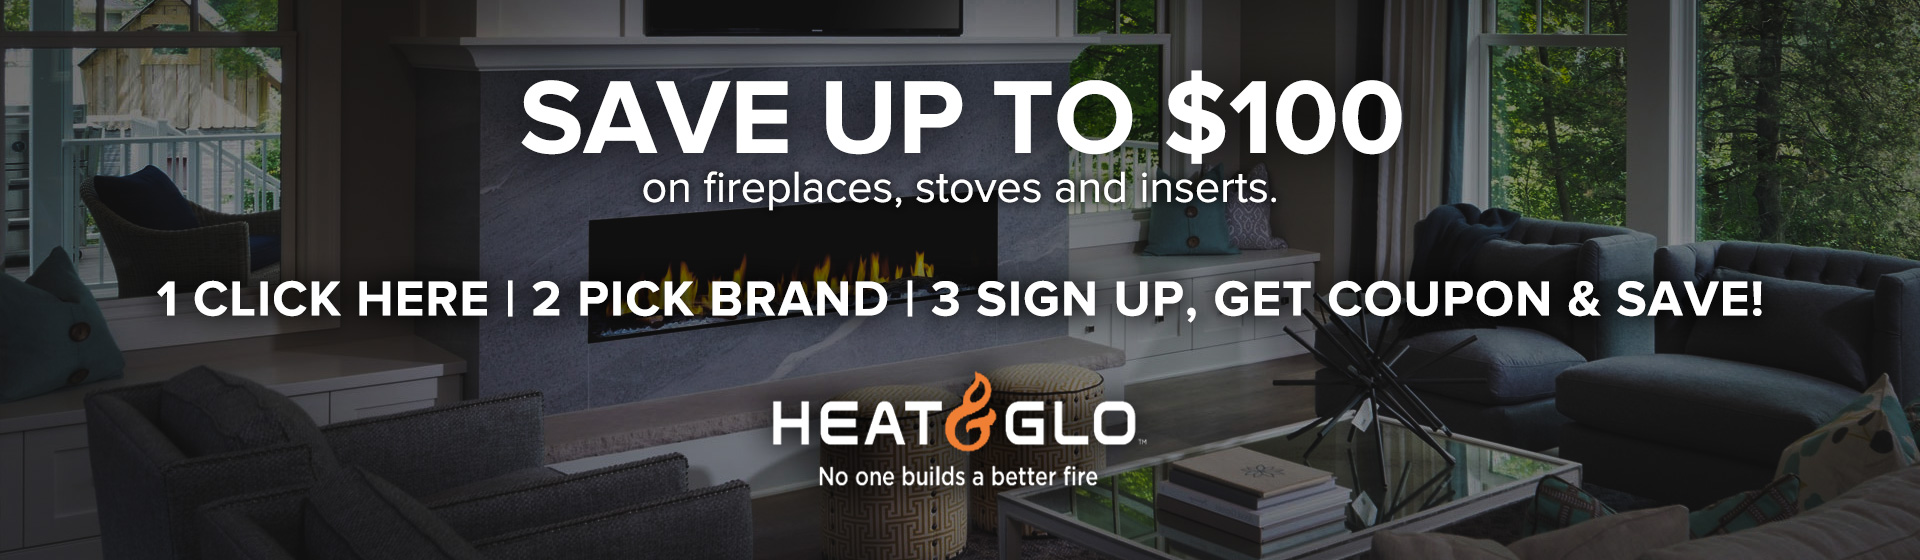 Up to $200 off on fireplaces, stoves, and inserts